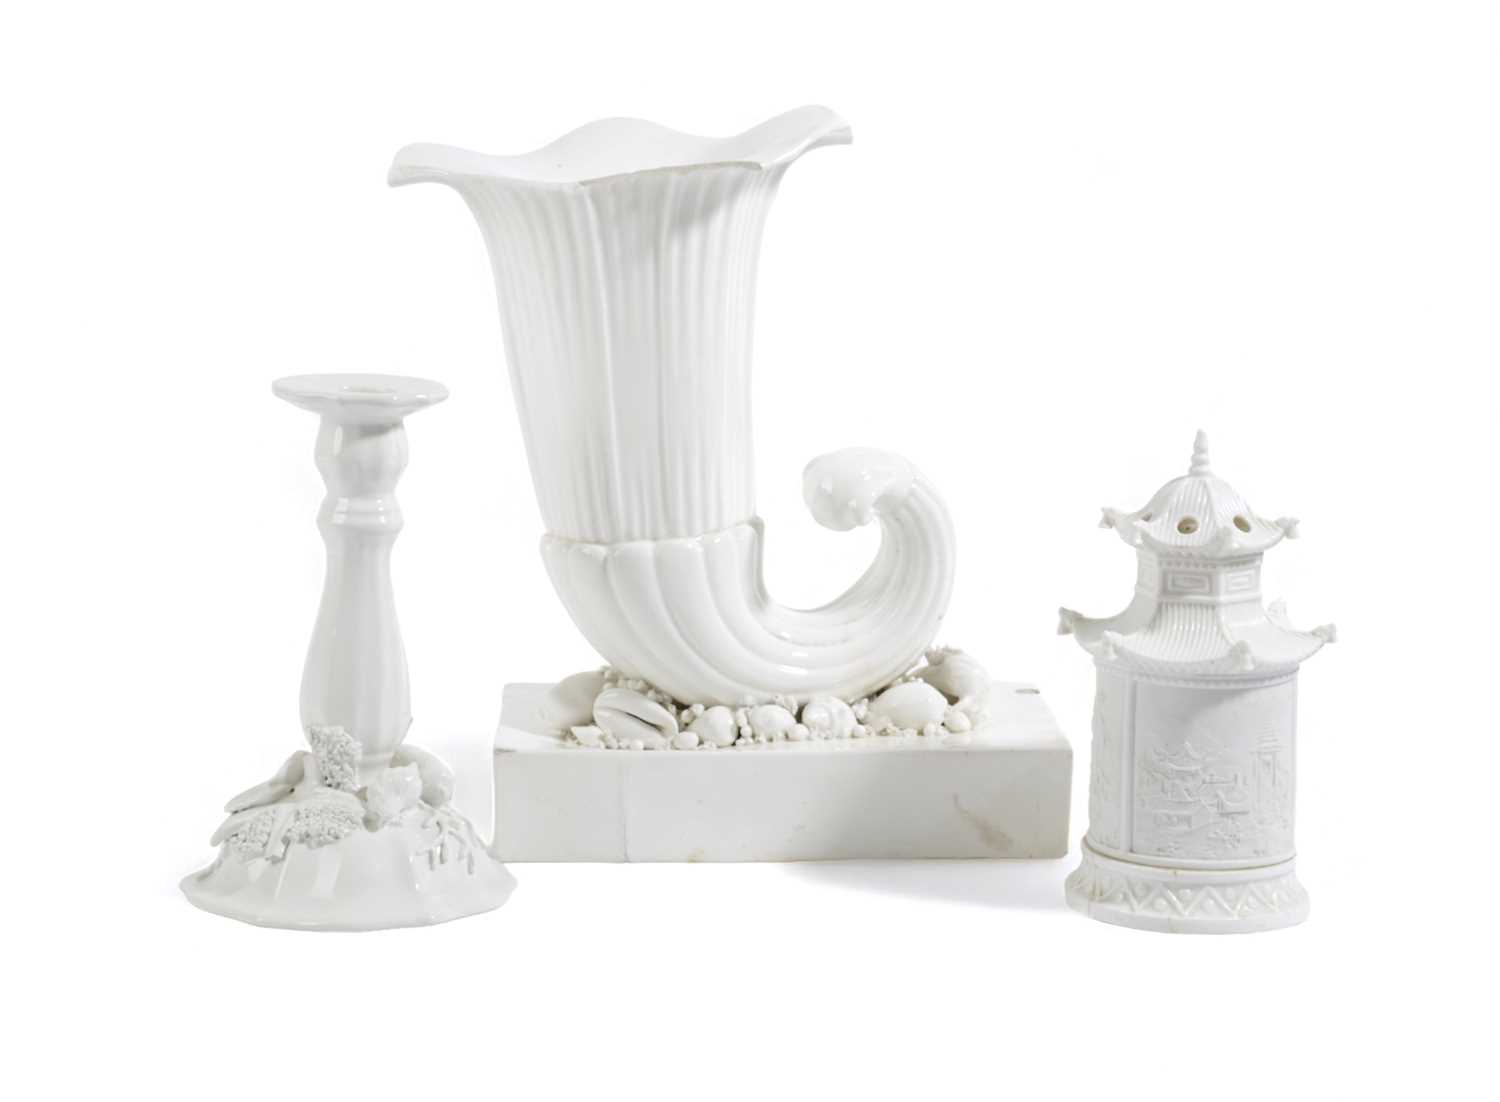 A LARGE PORCELAIN CORNUCOPIA VASE 19TH CENTURY in white, on a bed of shells and a rectangular